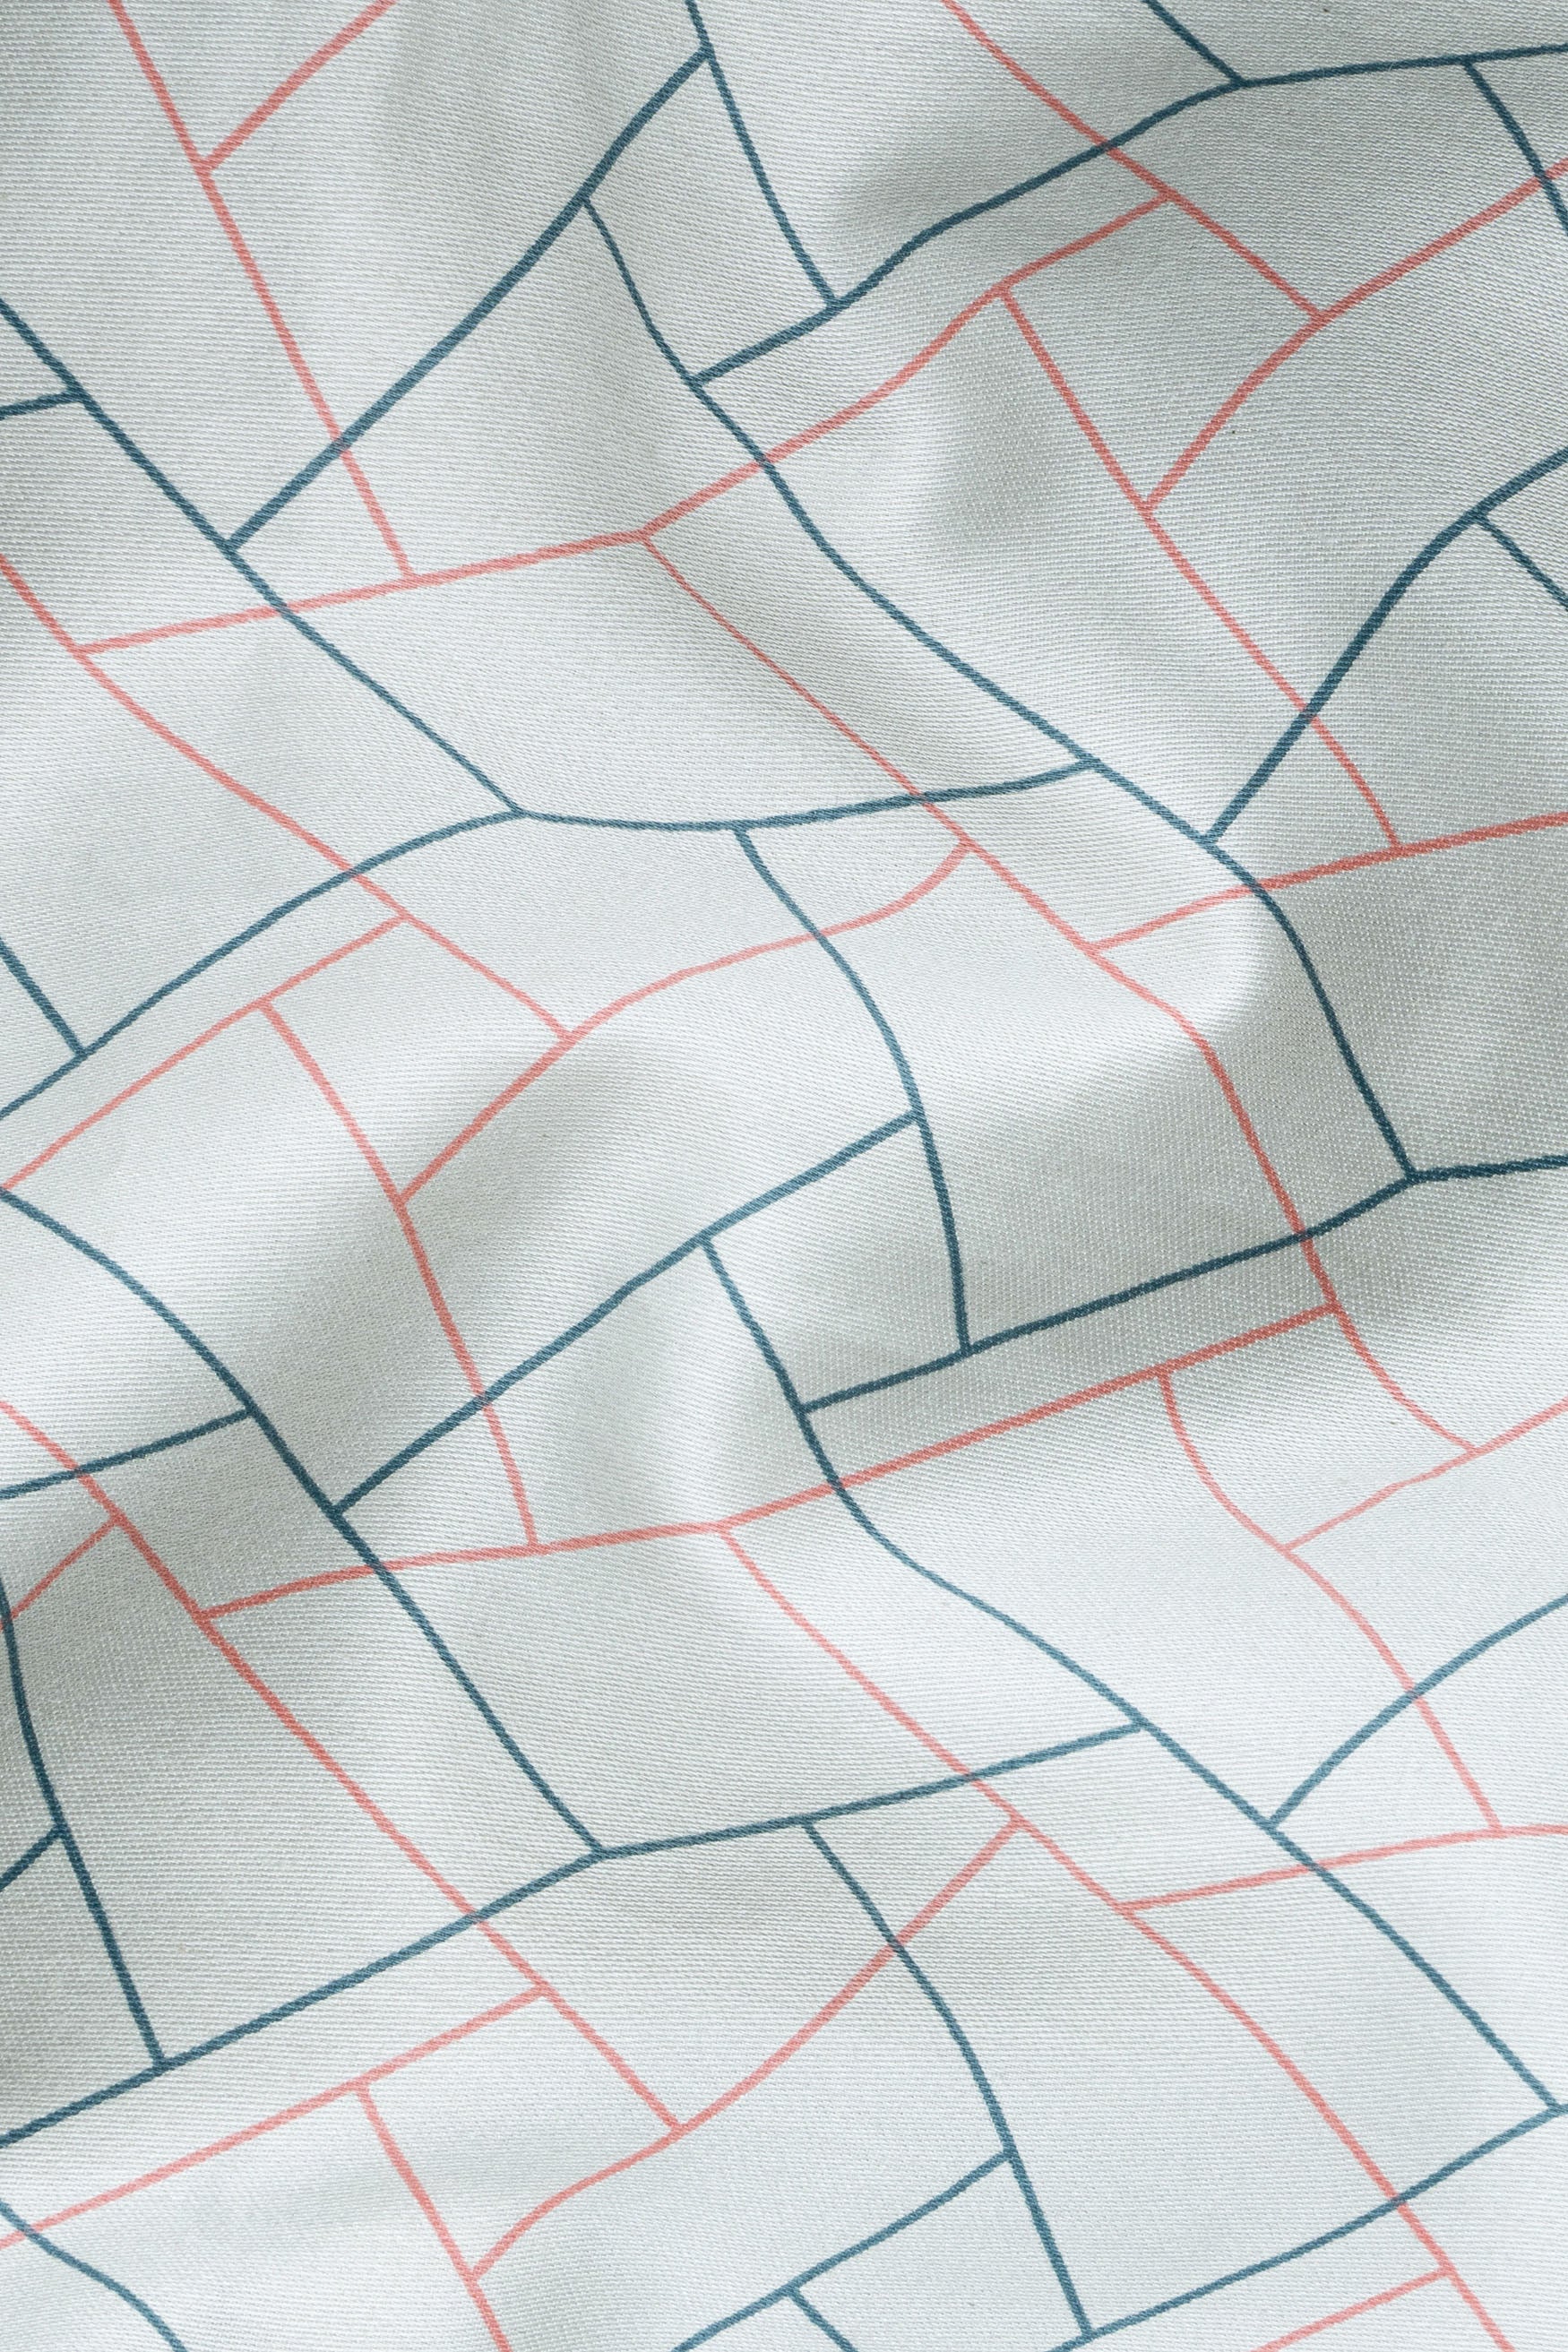 French Green Multicolour Abstract Lines Printed Subtle Sheen Super Soft Premium Cotton Shirt